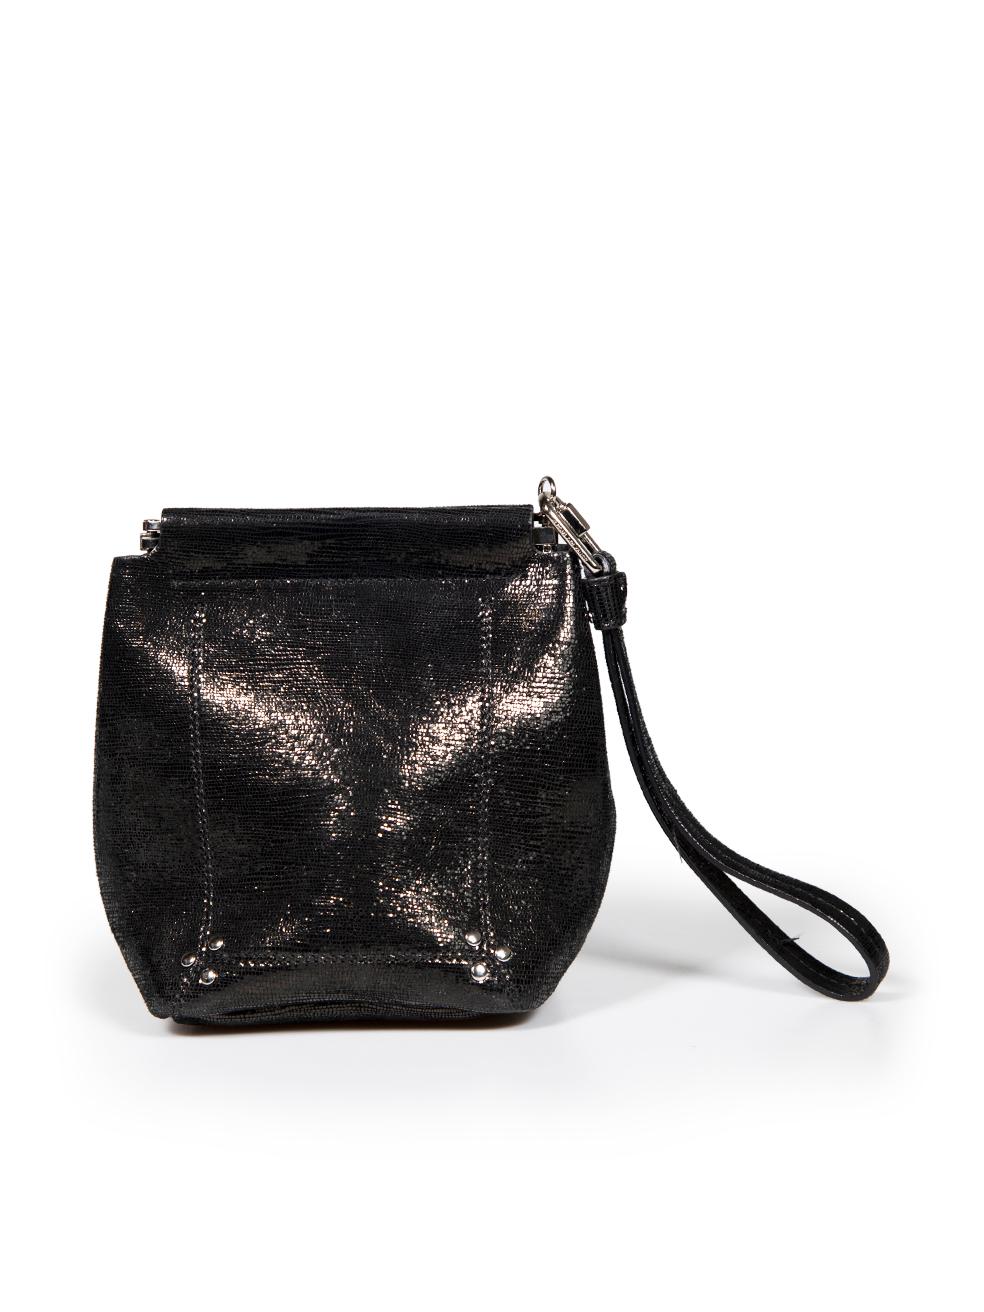 Jérôme Dreyfuss Black Leather Metallic Wristlet In Good Condition For Sale In London, GB